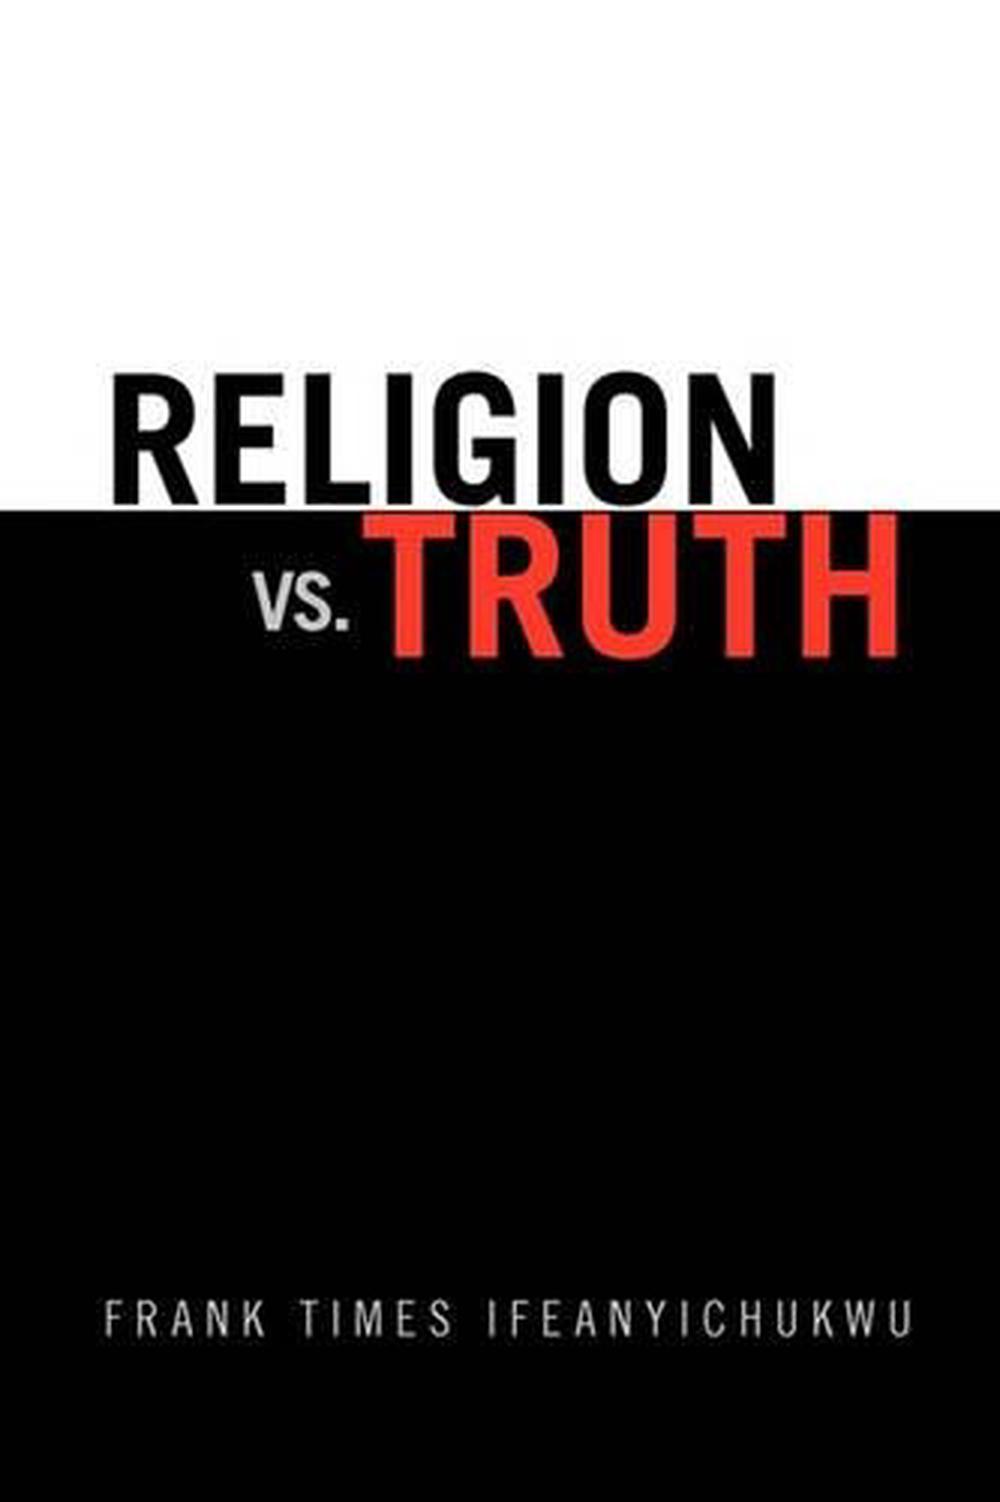 Religion vs. Truth by Frank Times Ifeanyichukwu (English) Paperback